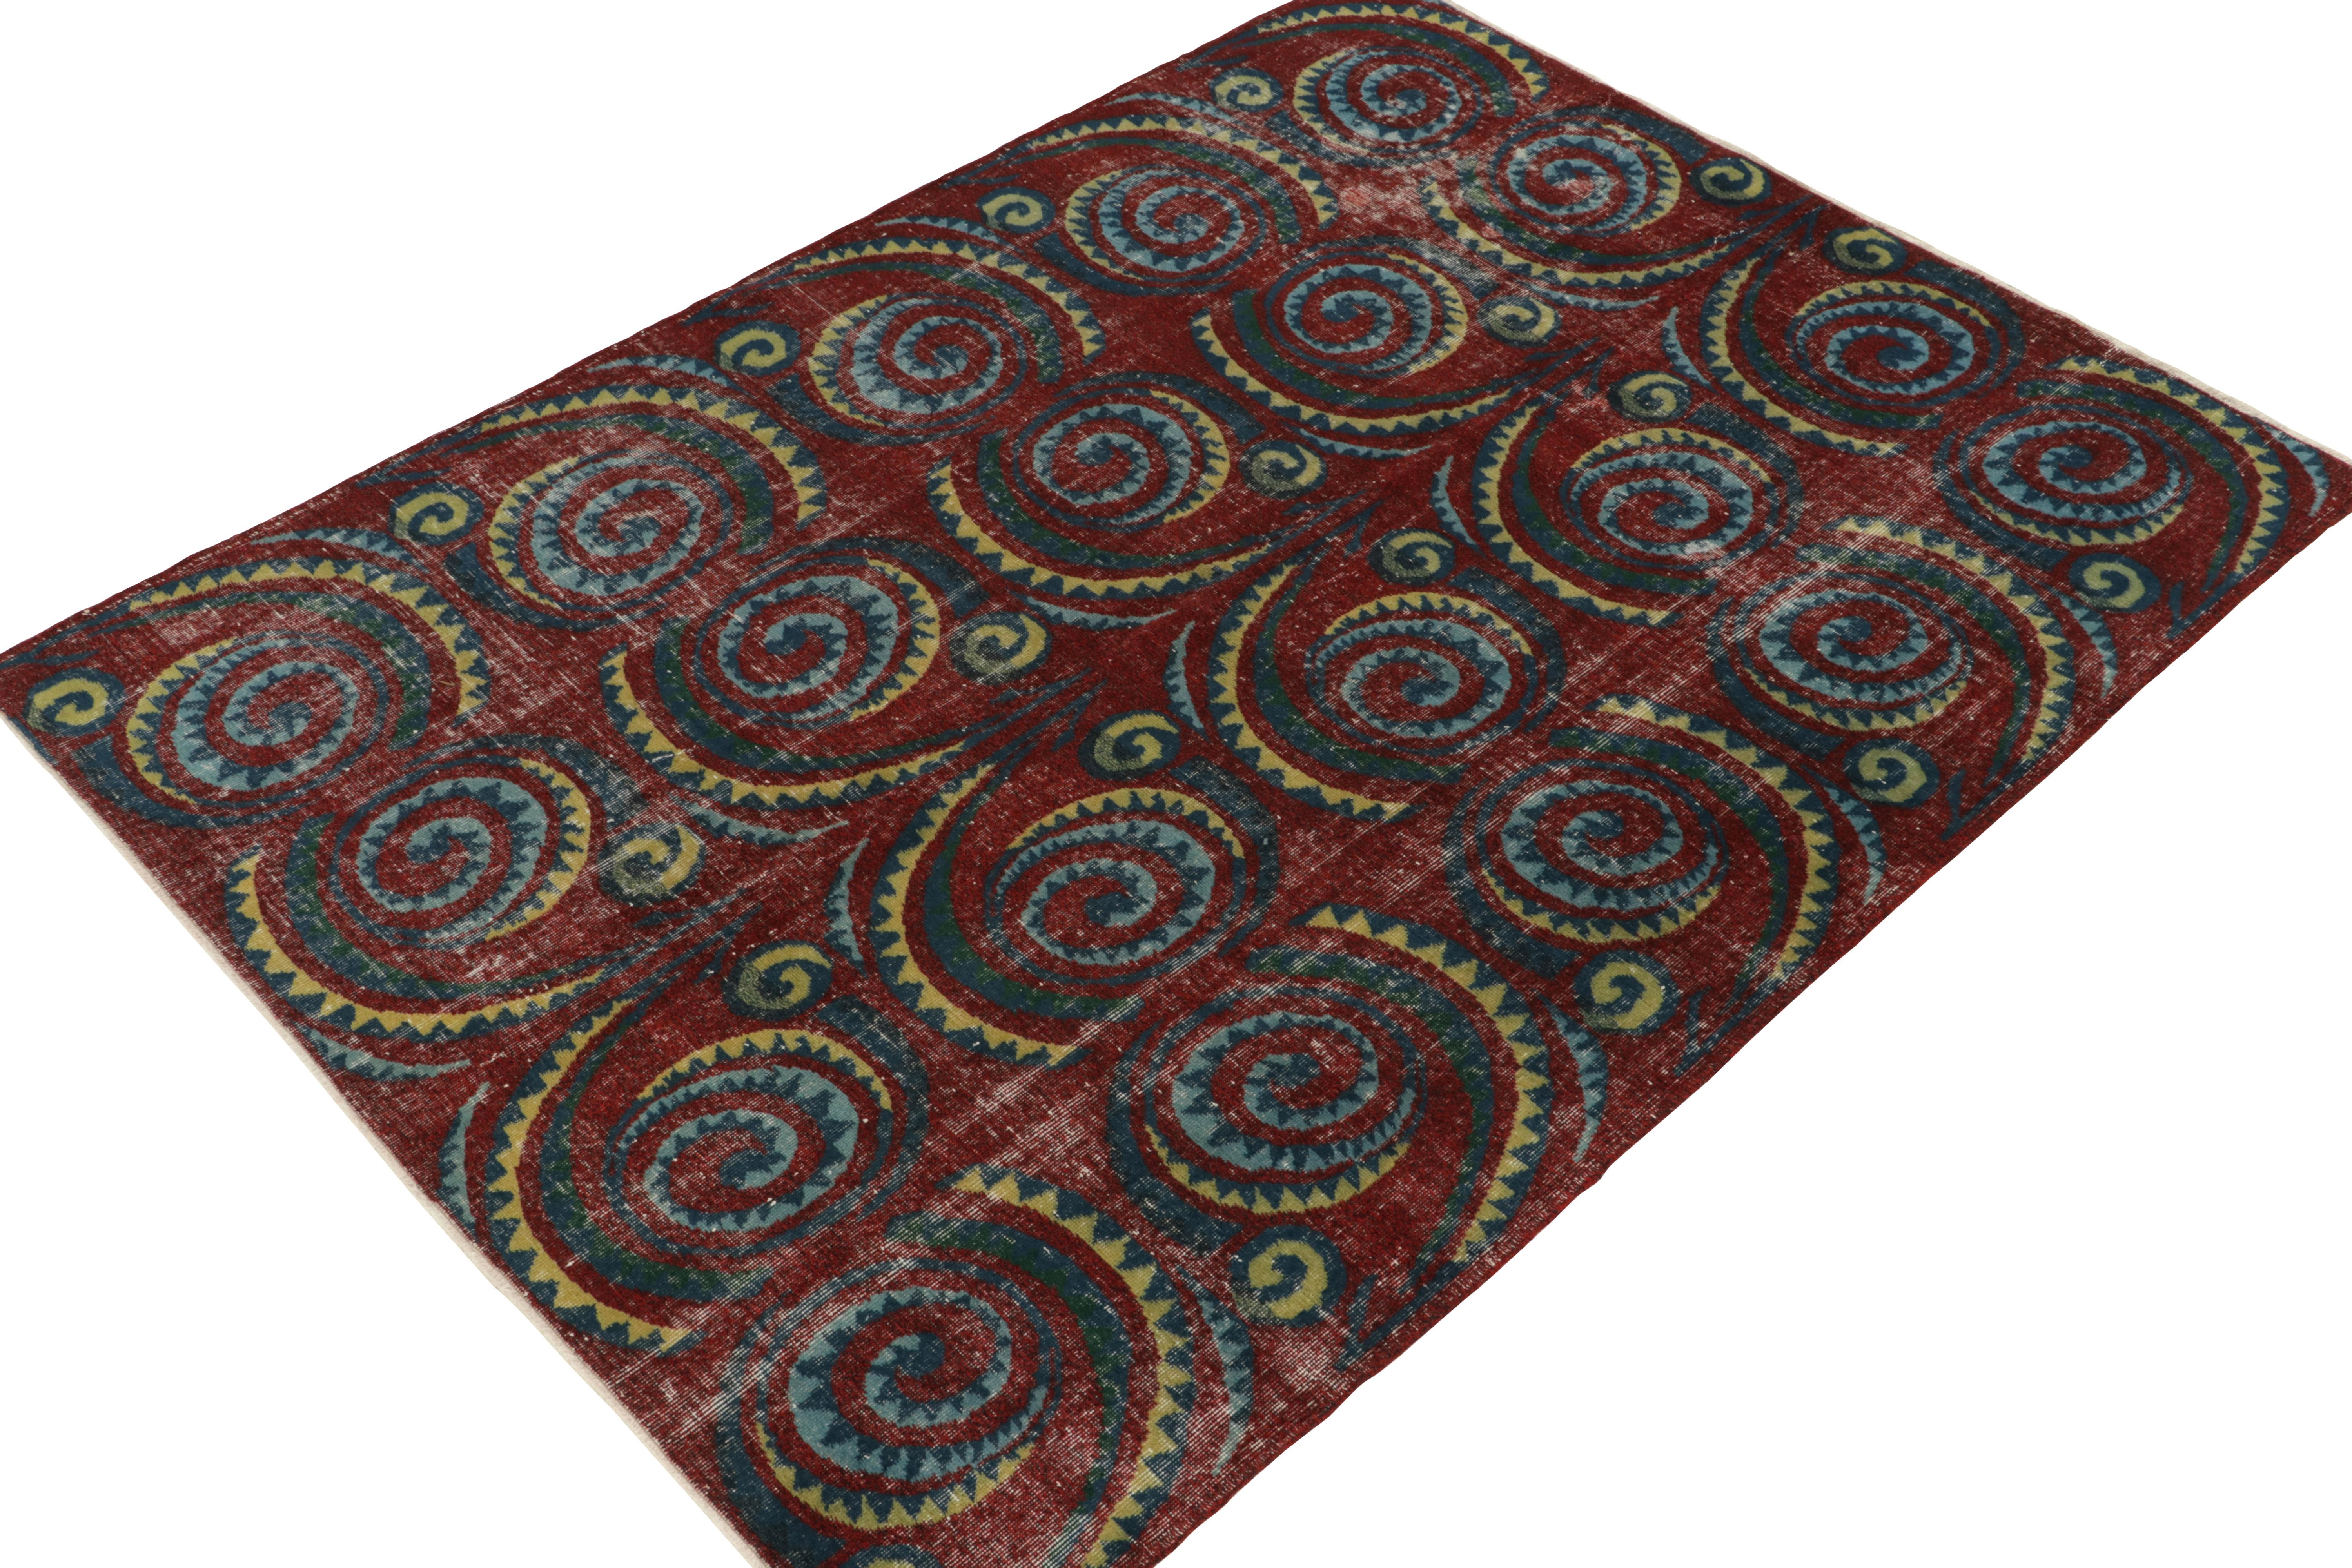 Turkish 1960s Vintage Art Deco Rug in Red Blue & Green Geometric Pattern, by Rug & Kilim For Sale